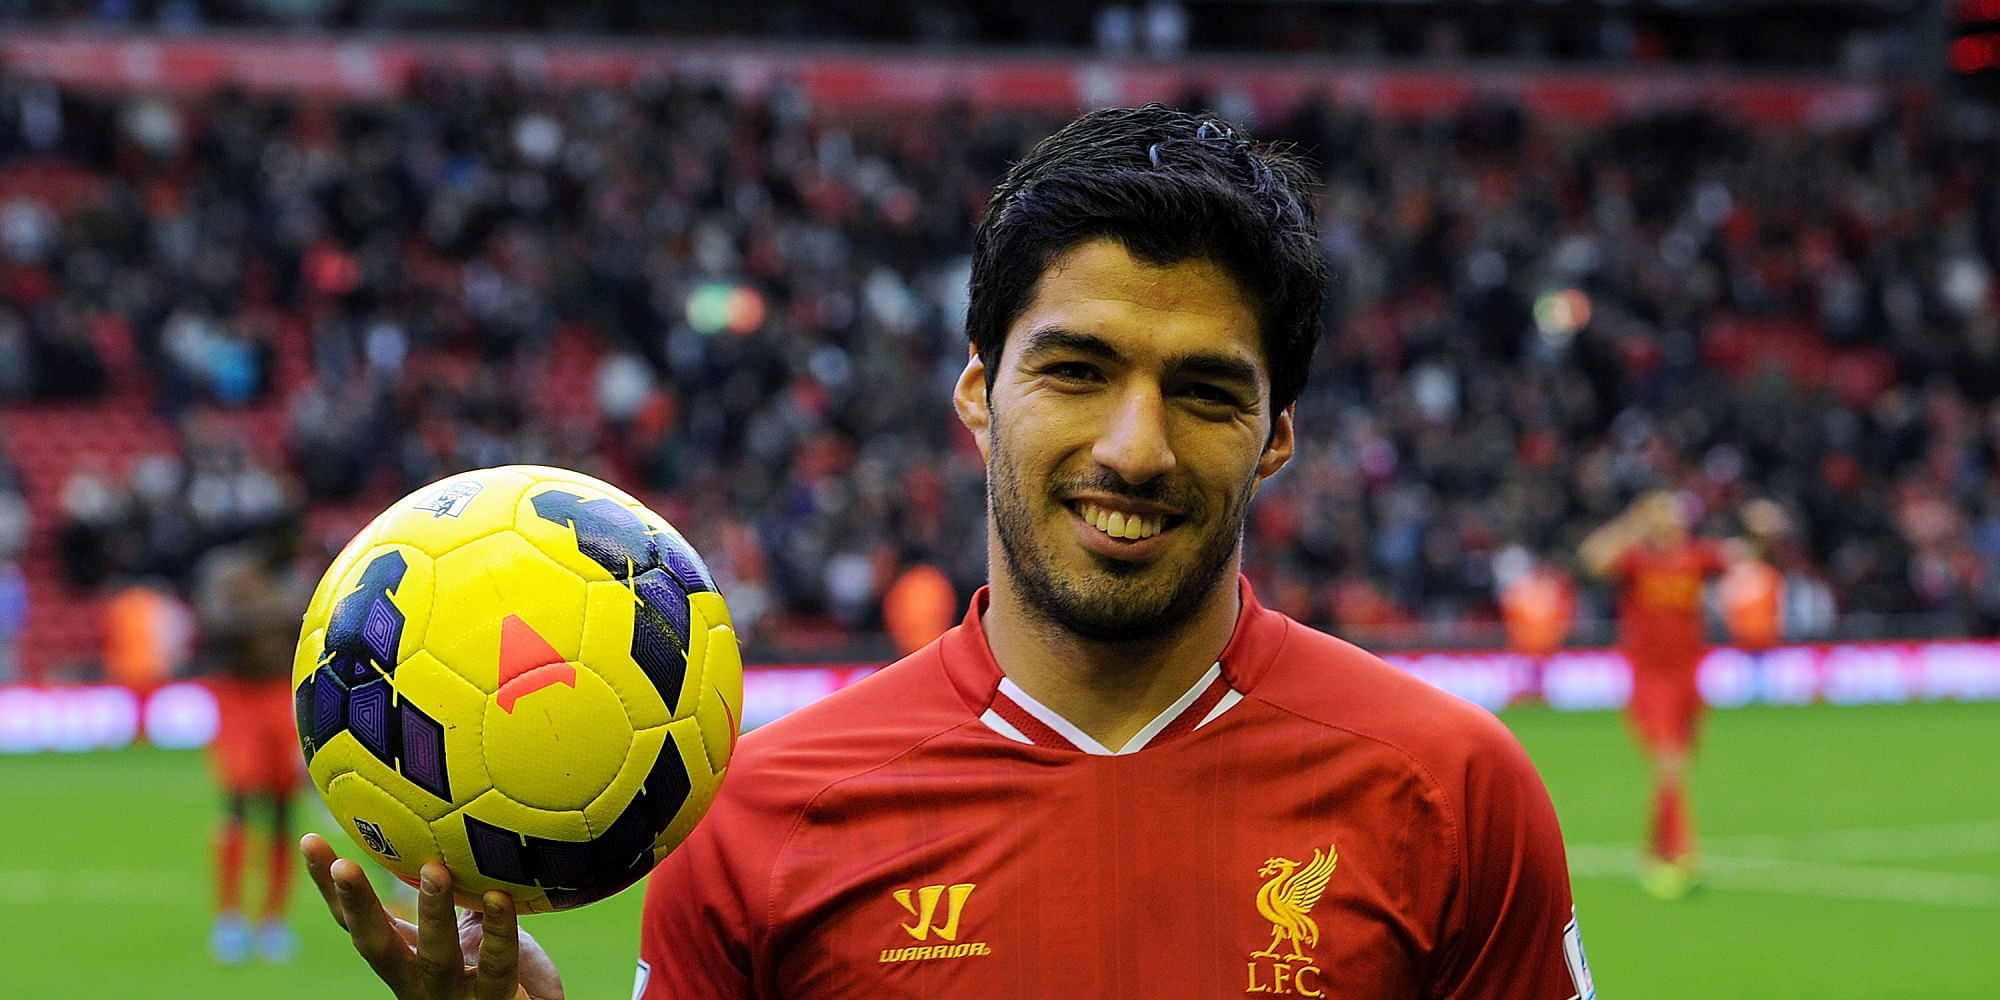 7 facts you didn't know about Luis Suarez - Slide 7 of 7